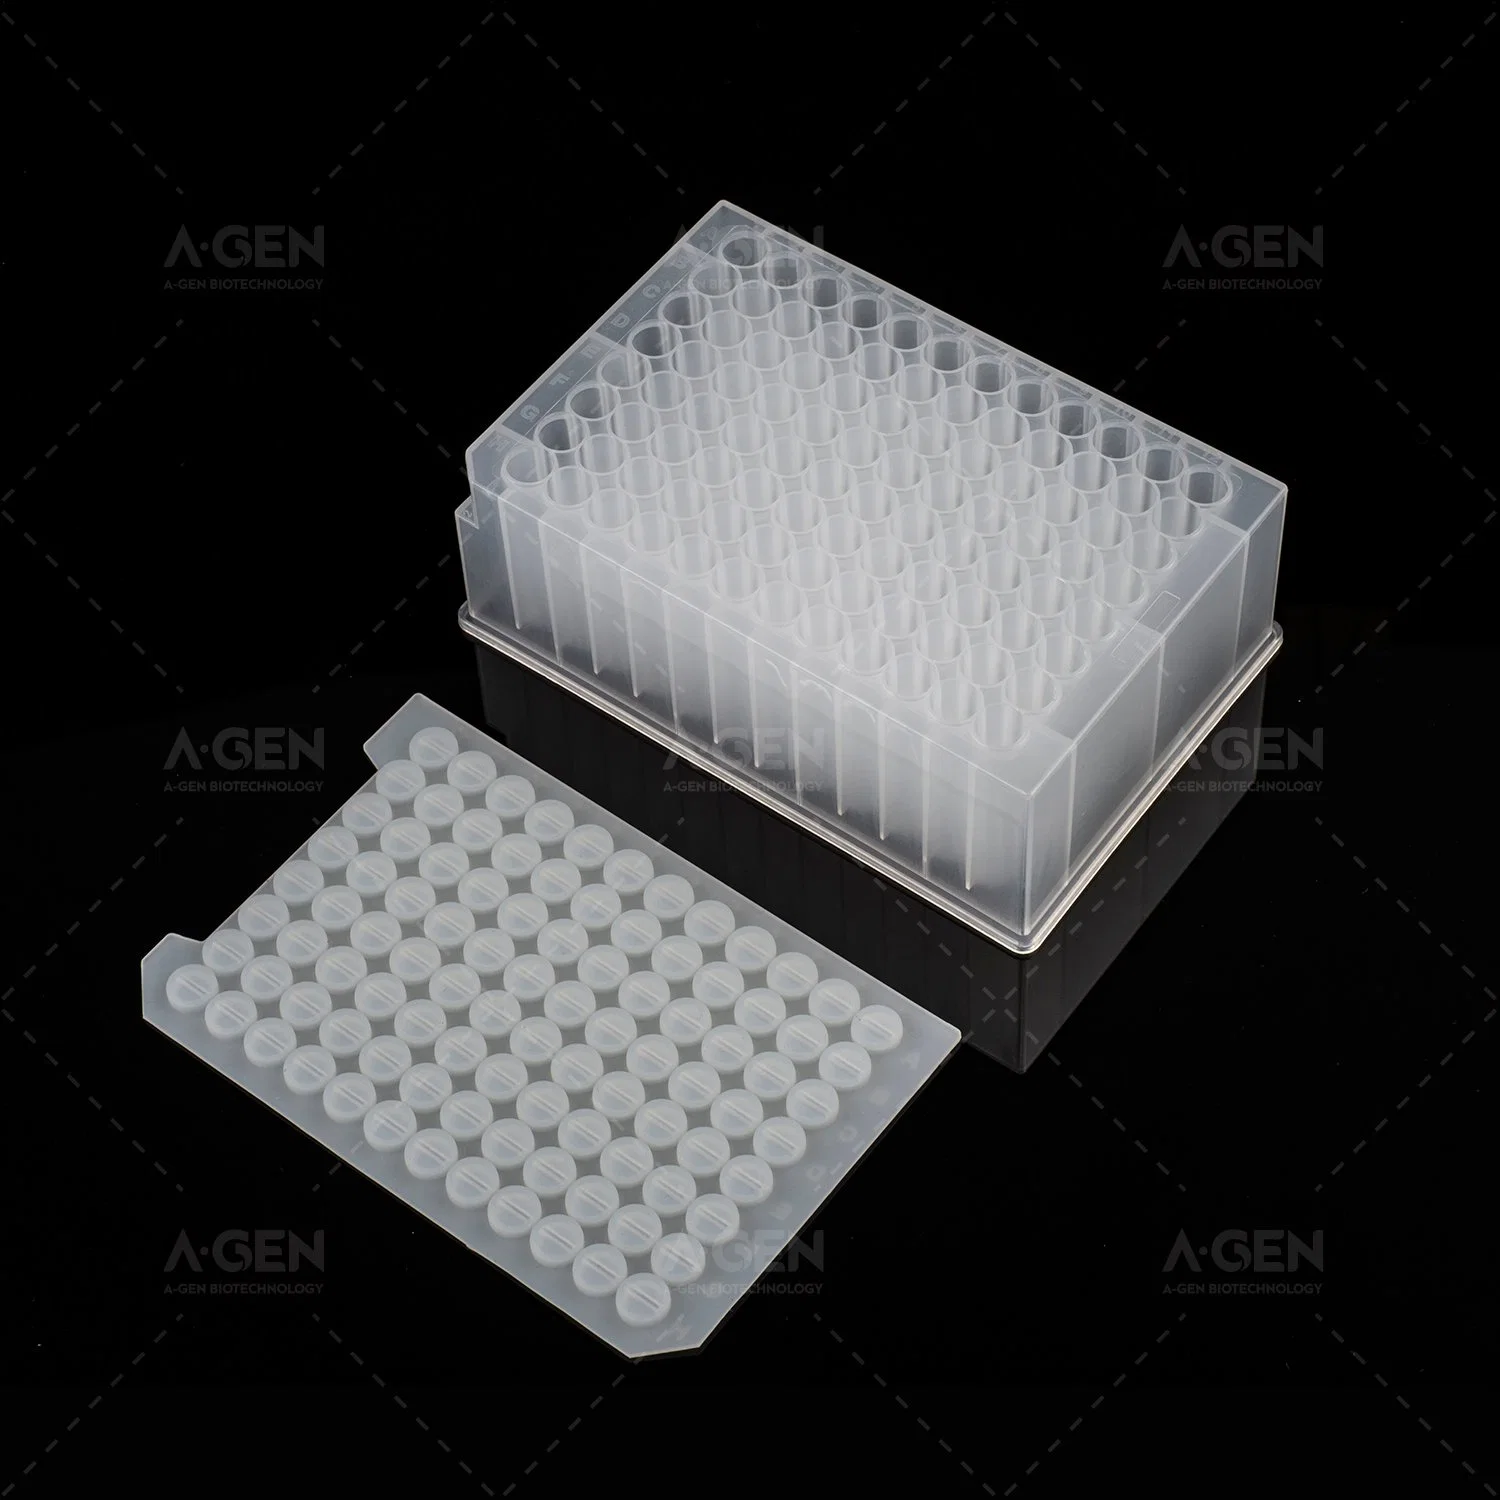 96 Round Well Plate Cover of Silicone Sealing Film